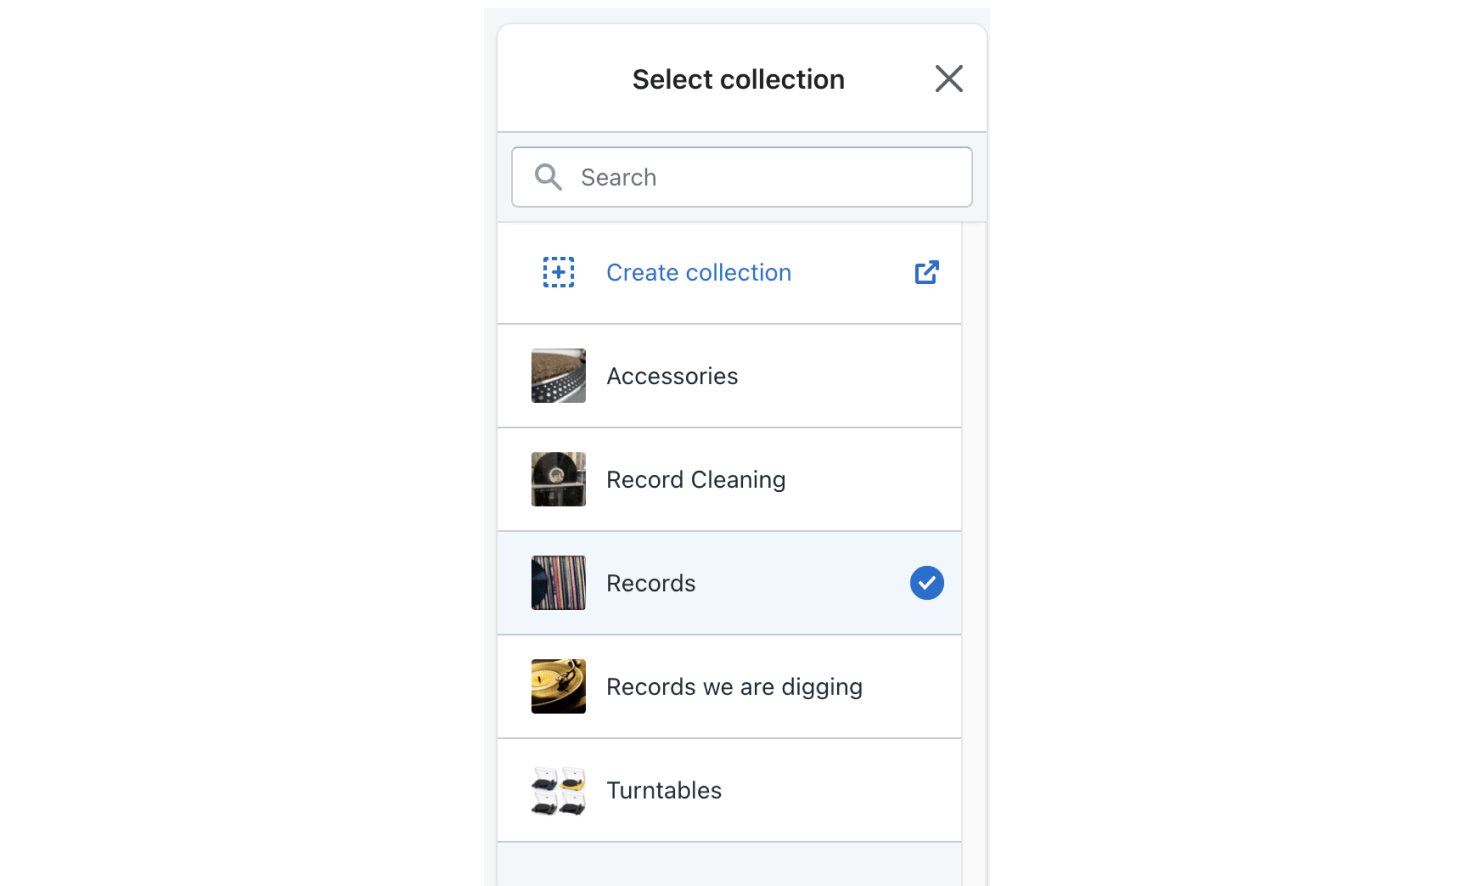 Displaying a Shopify collection on a page